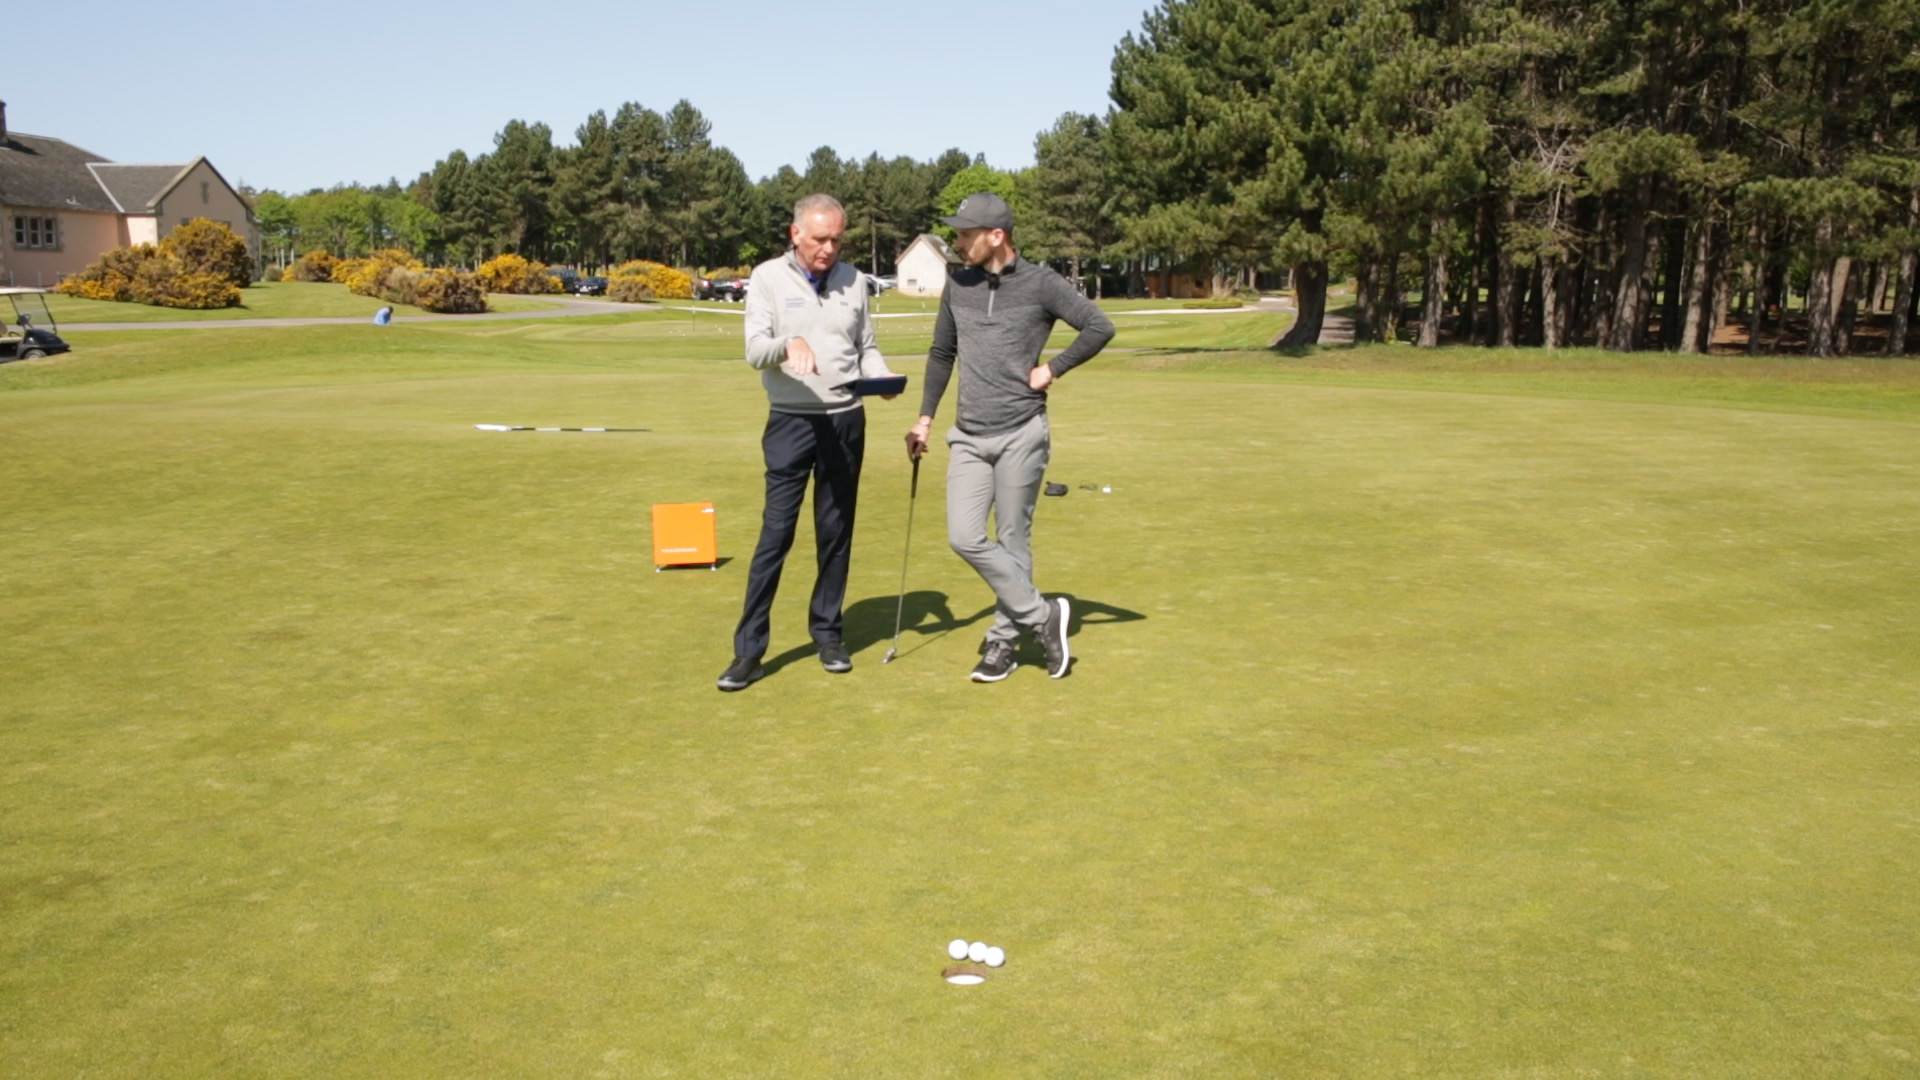 Gary Nicol's short game secrets: There is more than one way to hole a putt